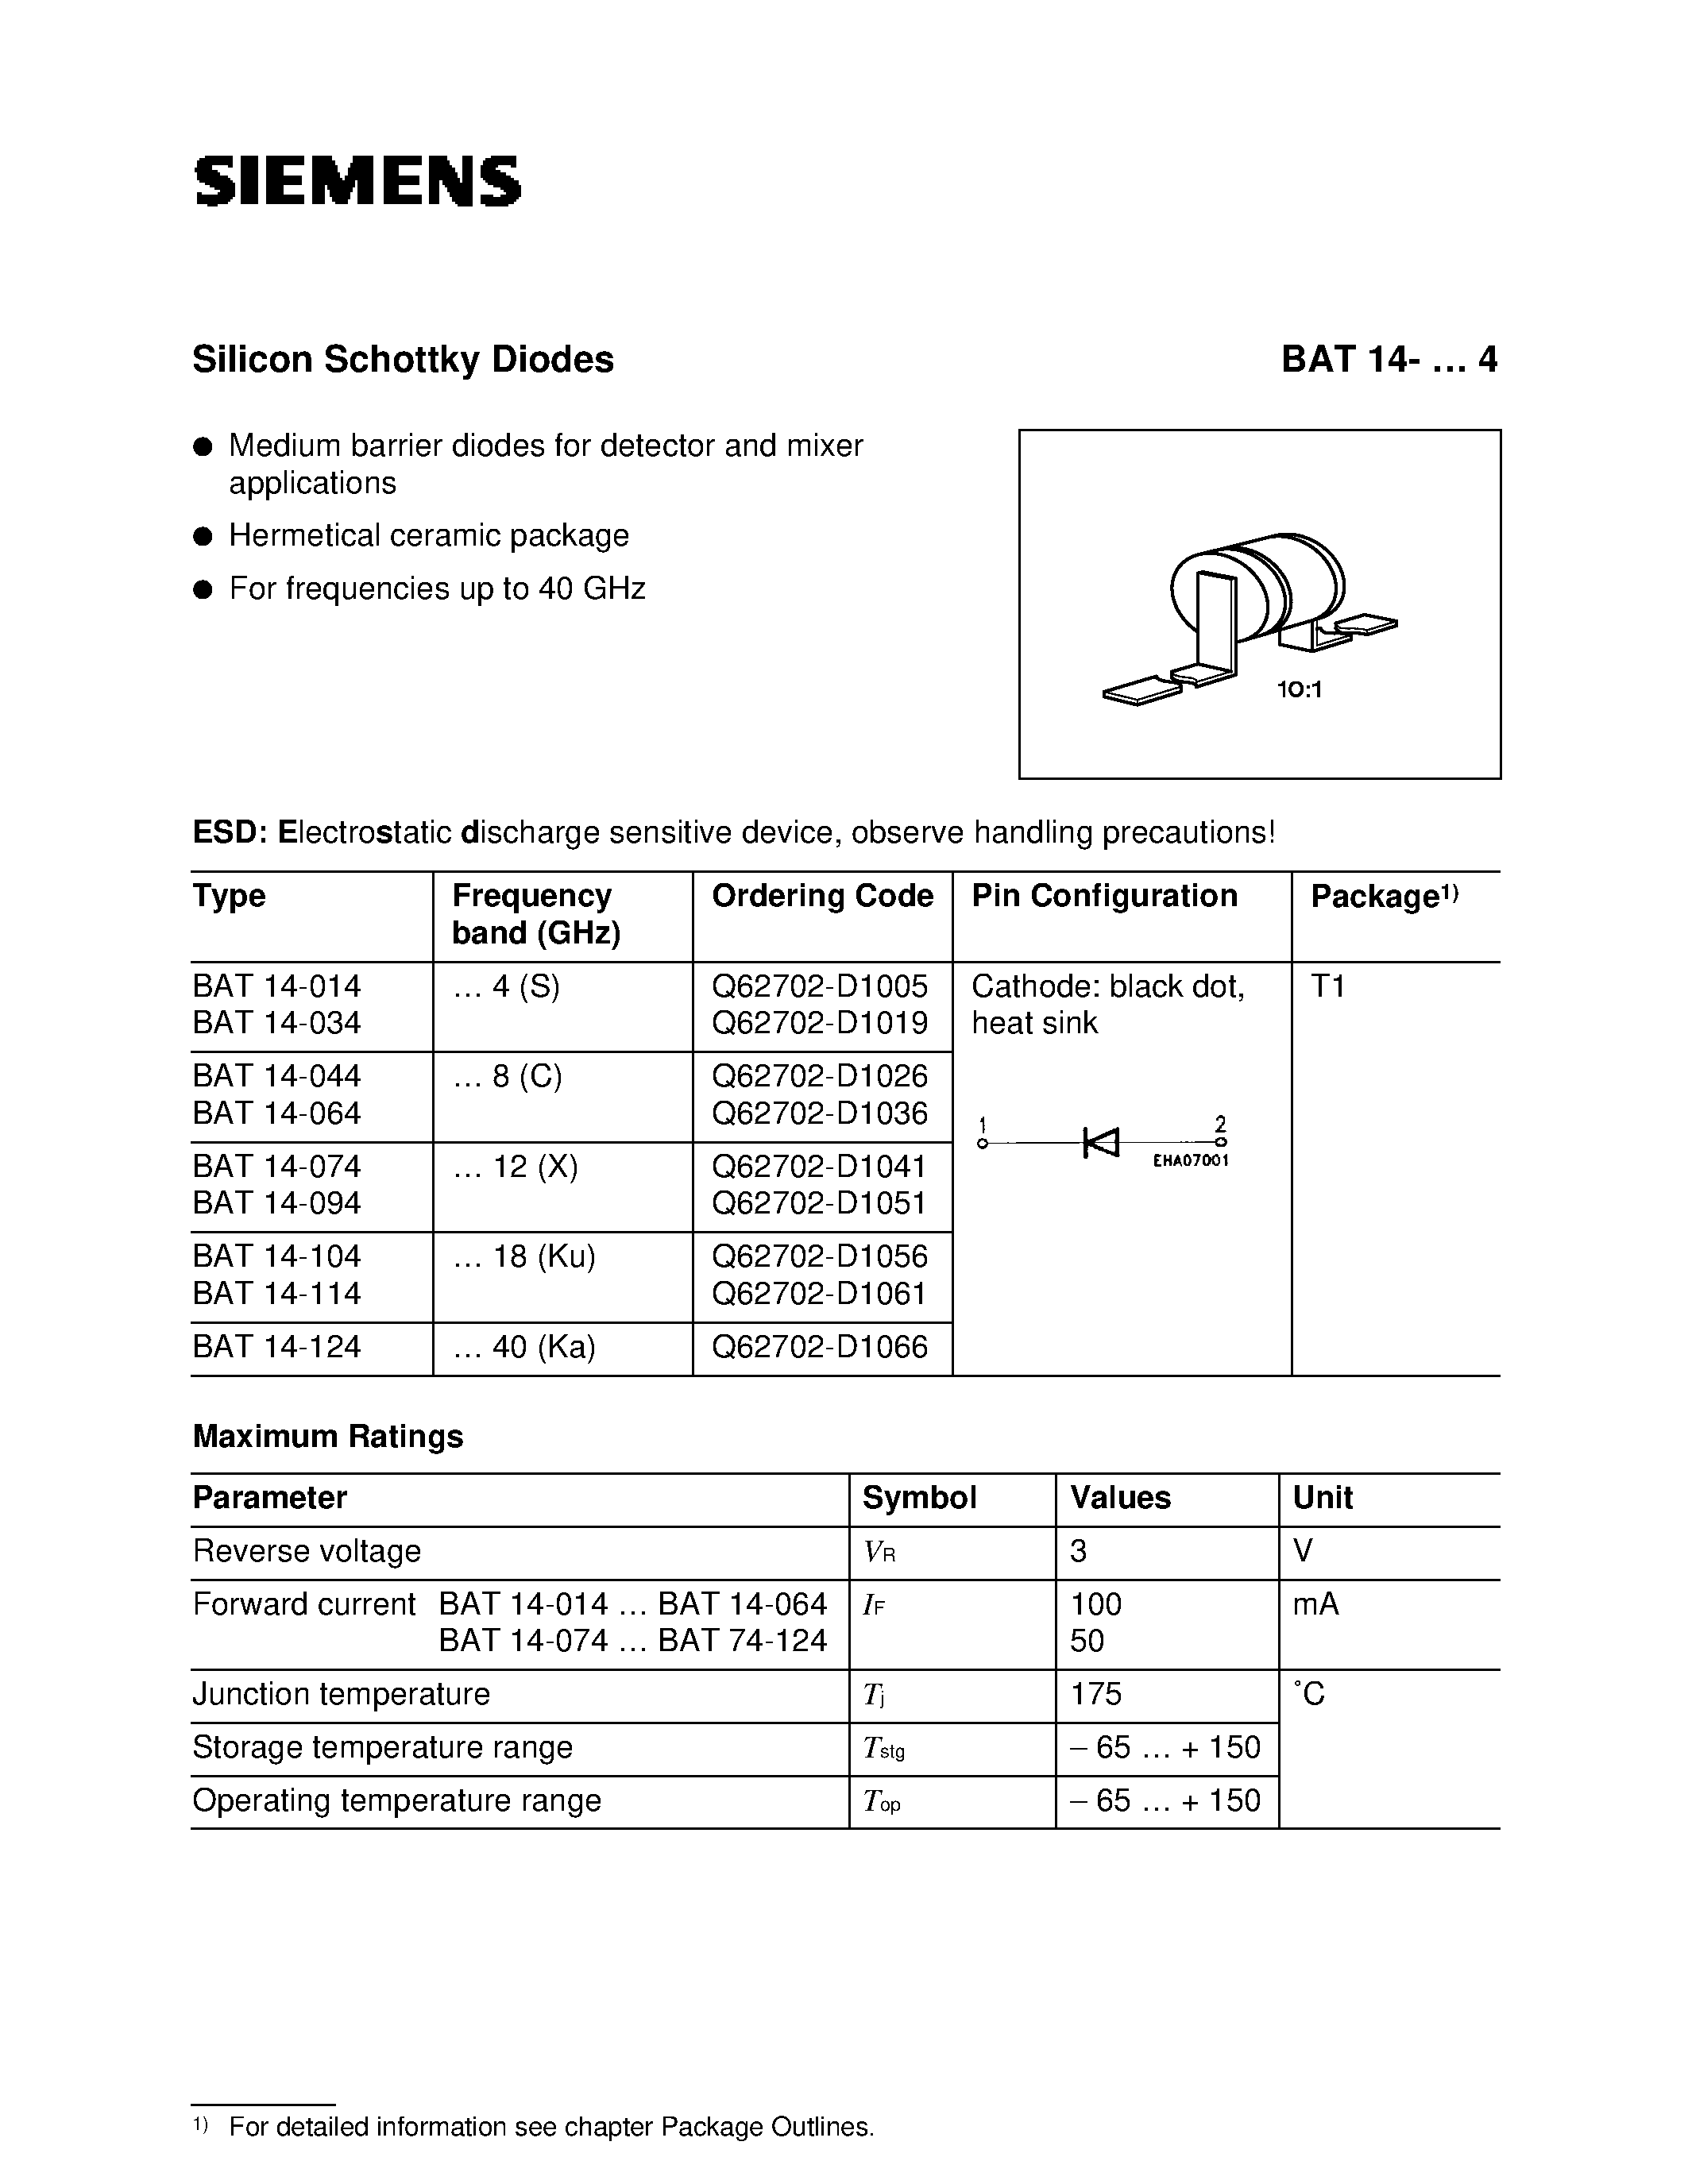 Datasheet BAT14-044 - HiRel Silicon Schottky Diode (HiRel Discrete and Microwave Semiconductor Medium barrier diodes for detector and mixer applications) page 1